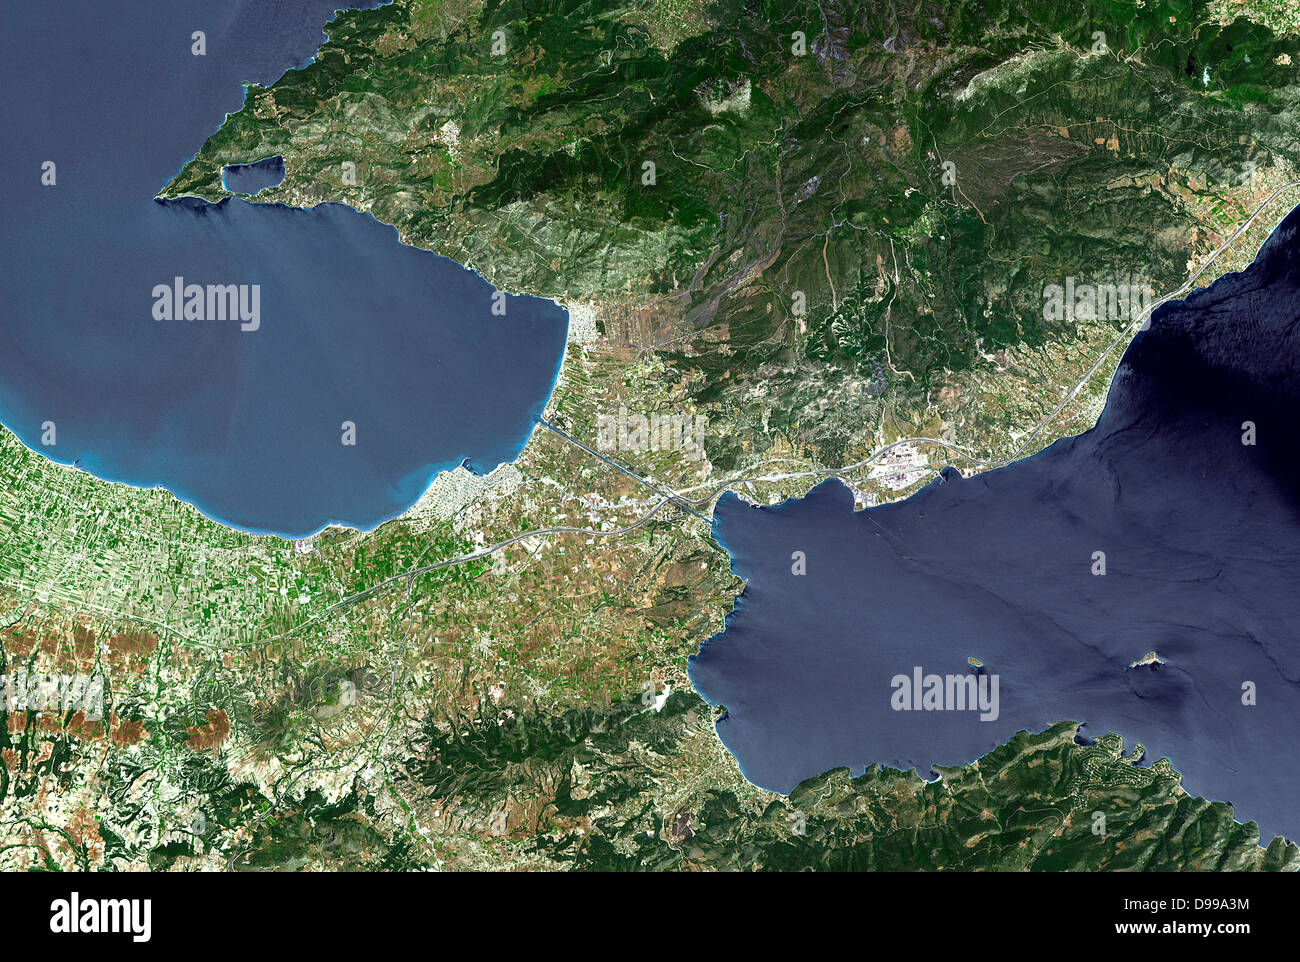 The Isthmus of Corinth is the only land bridge between the country's north (Attica) and south (Peloponnese). Greece. Satellite. May 9, 2005 Stock Photo